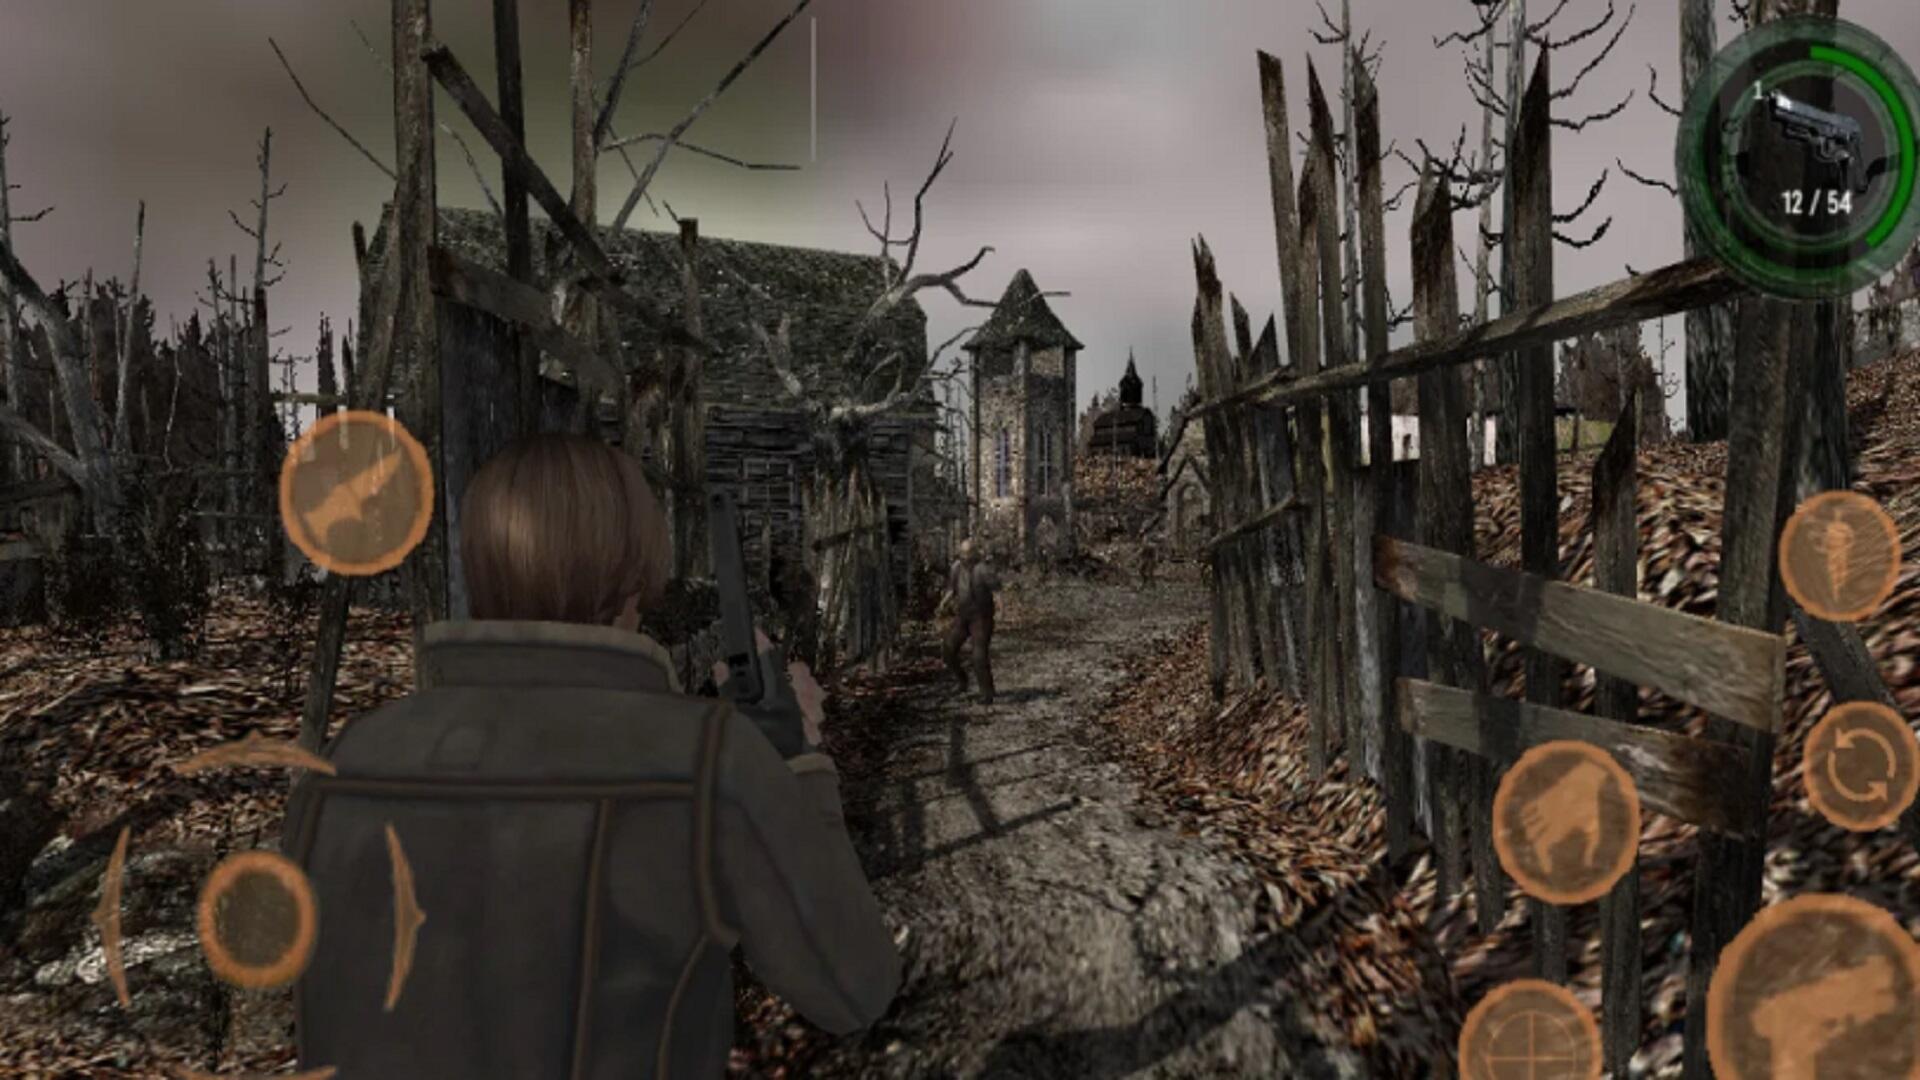 How to download Resident Evil 4 APK latest version